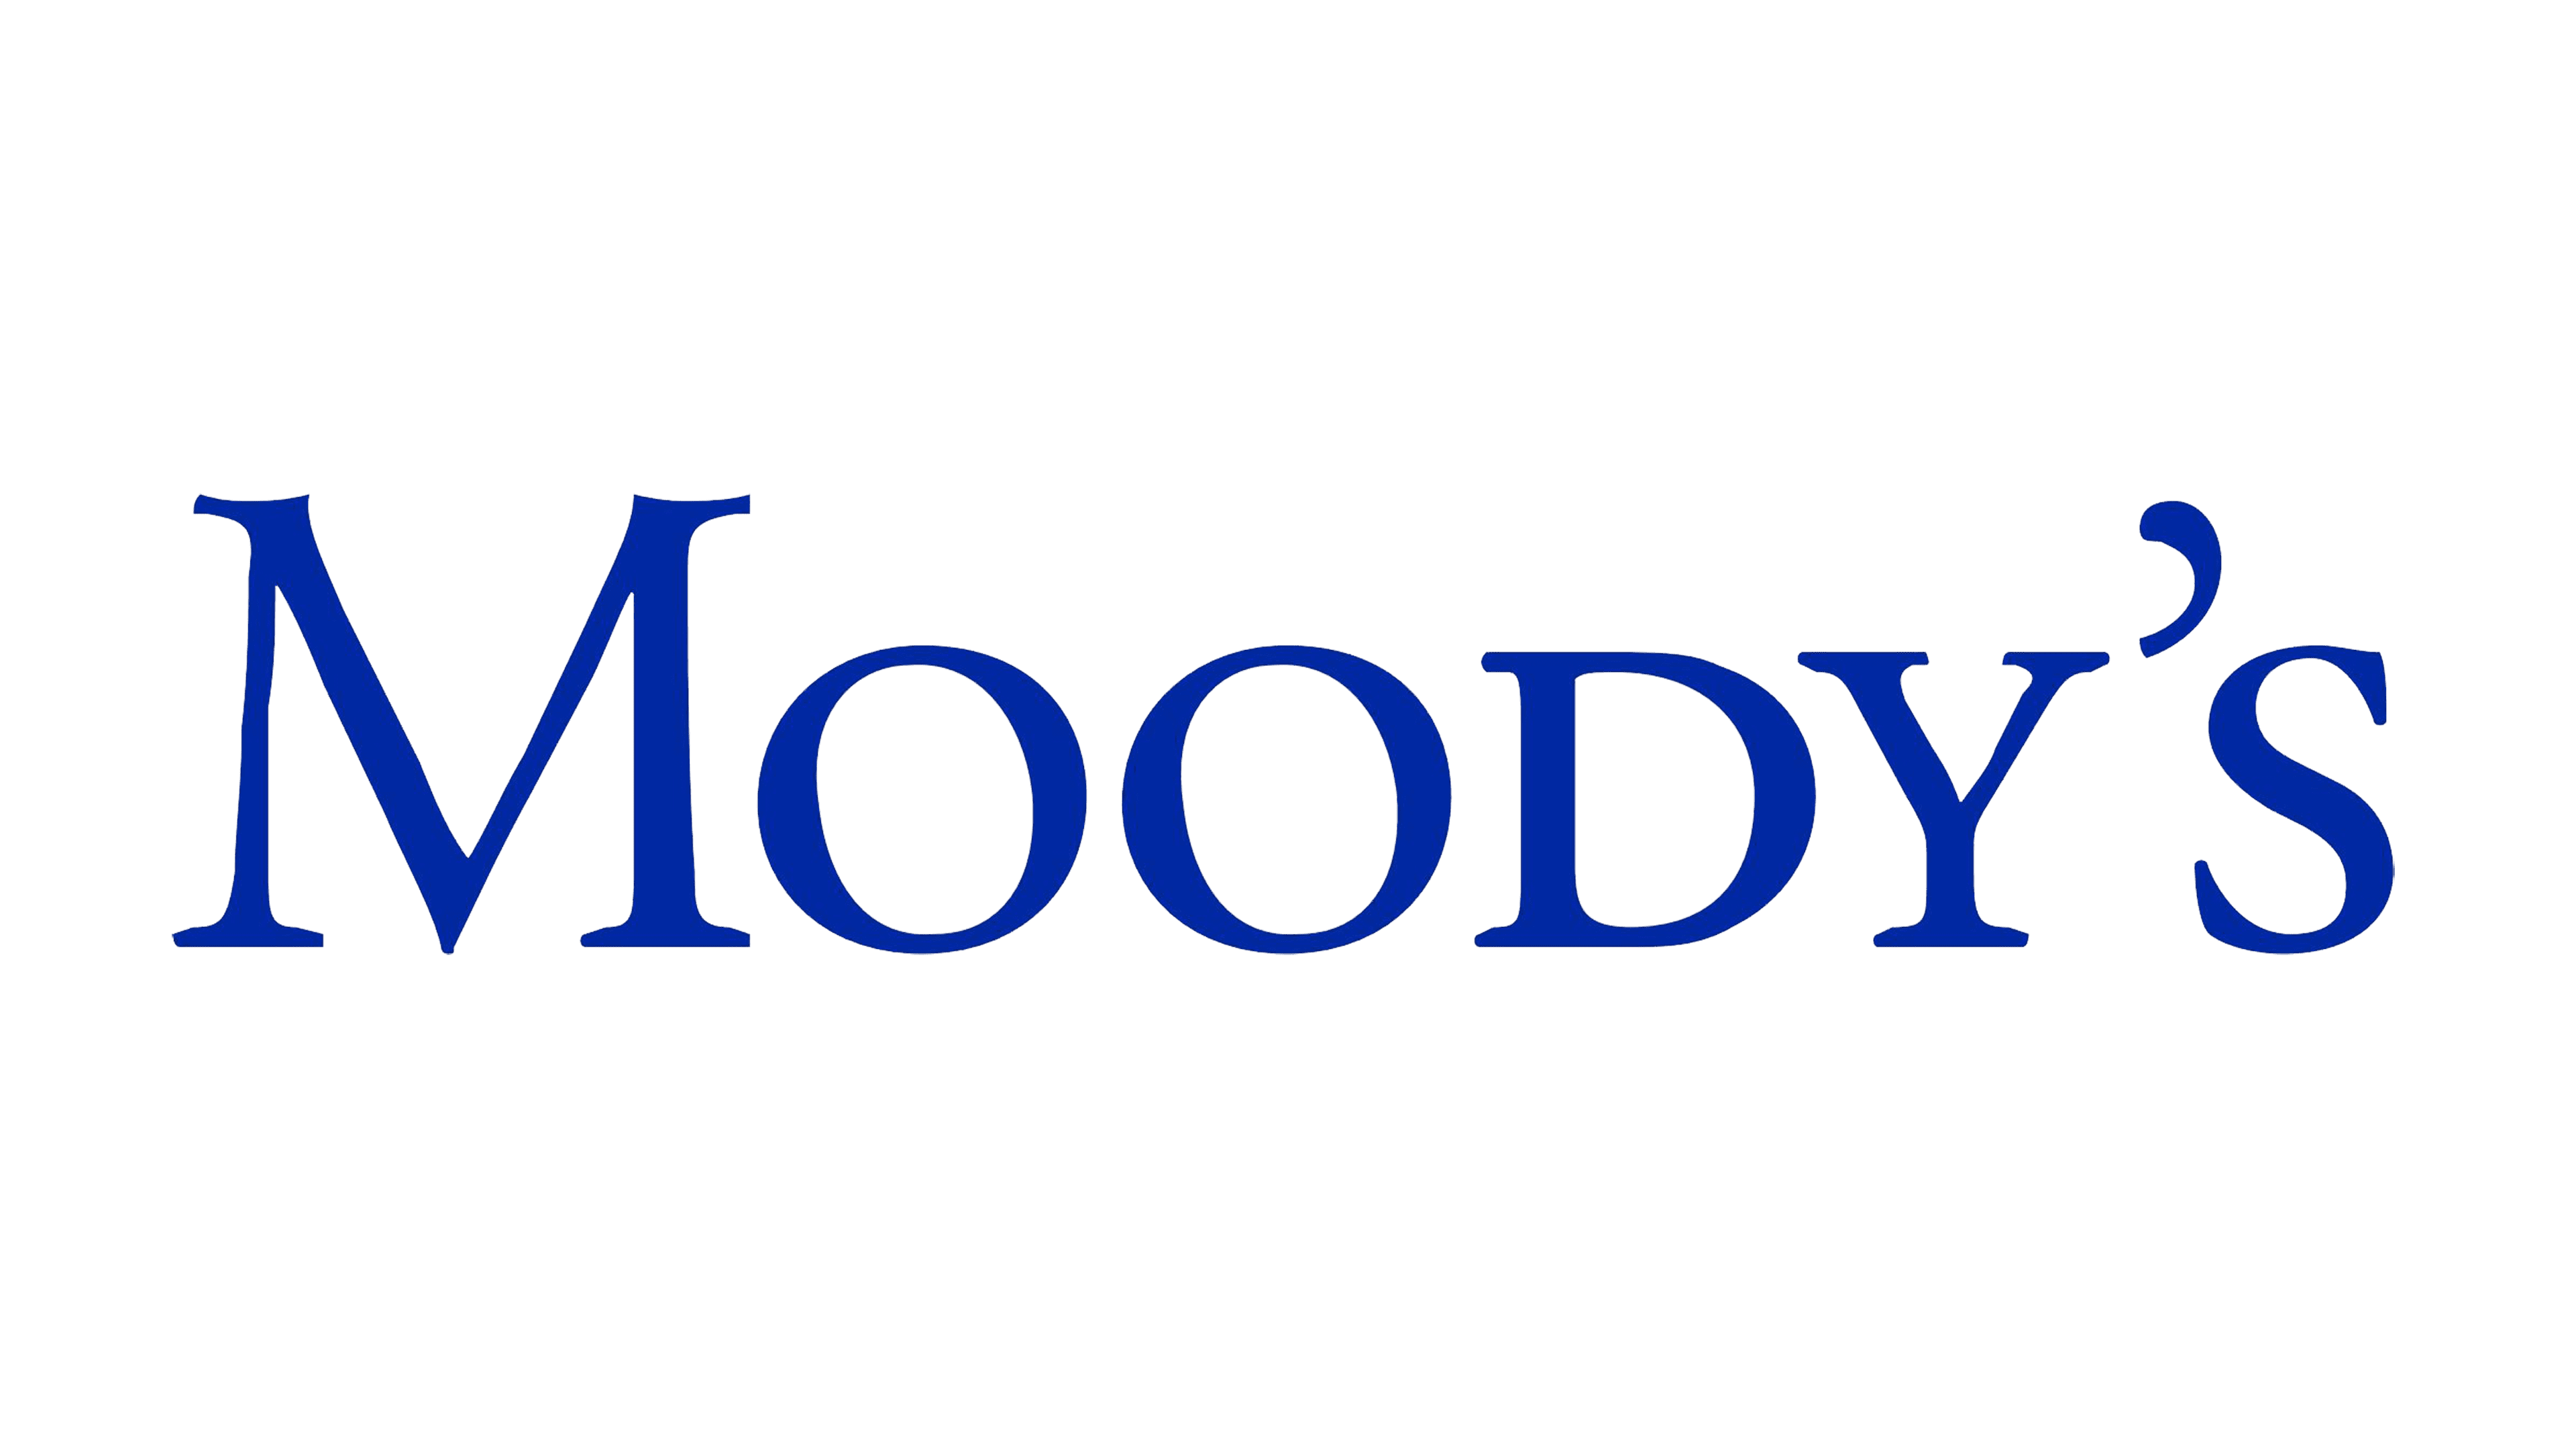 Moody’s Analytics revises downward global GDP forecasts for 2022, 2023